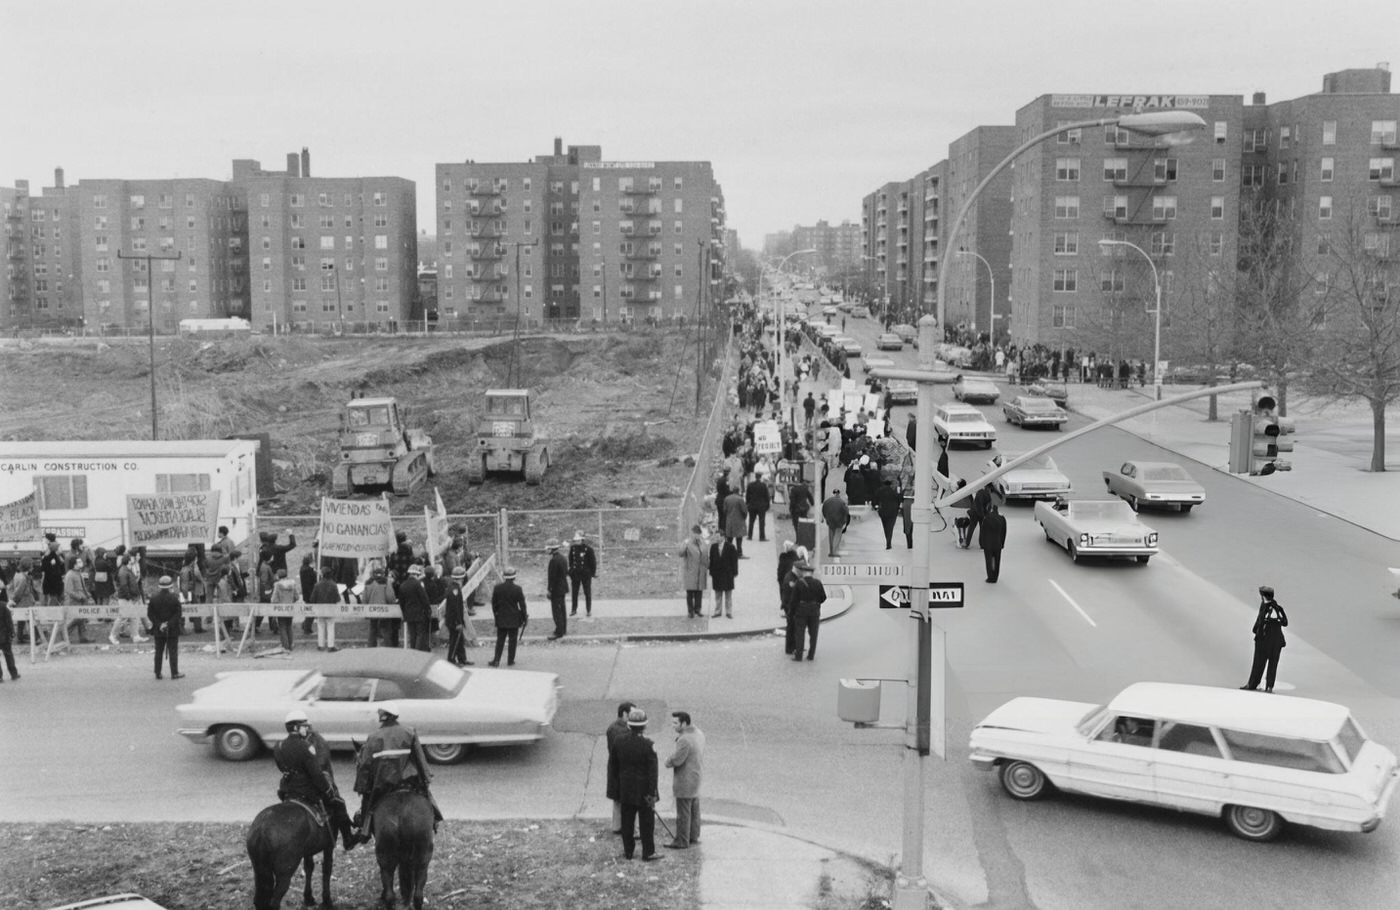 Residents Of The Forest Hills Neighborhood Of Queens Stage A Protest At Plans To Build A Low-Income Housing Development, 1970S.